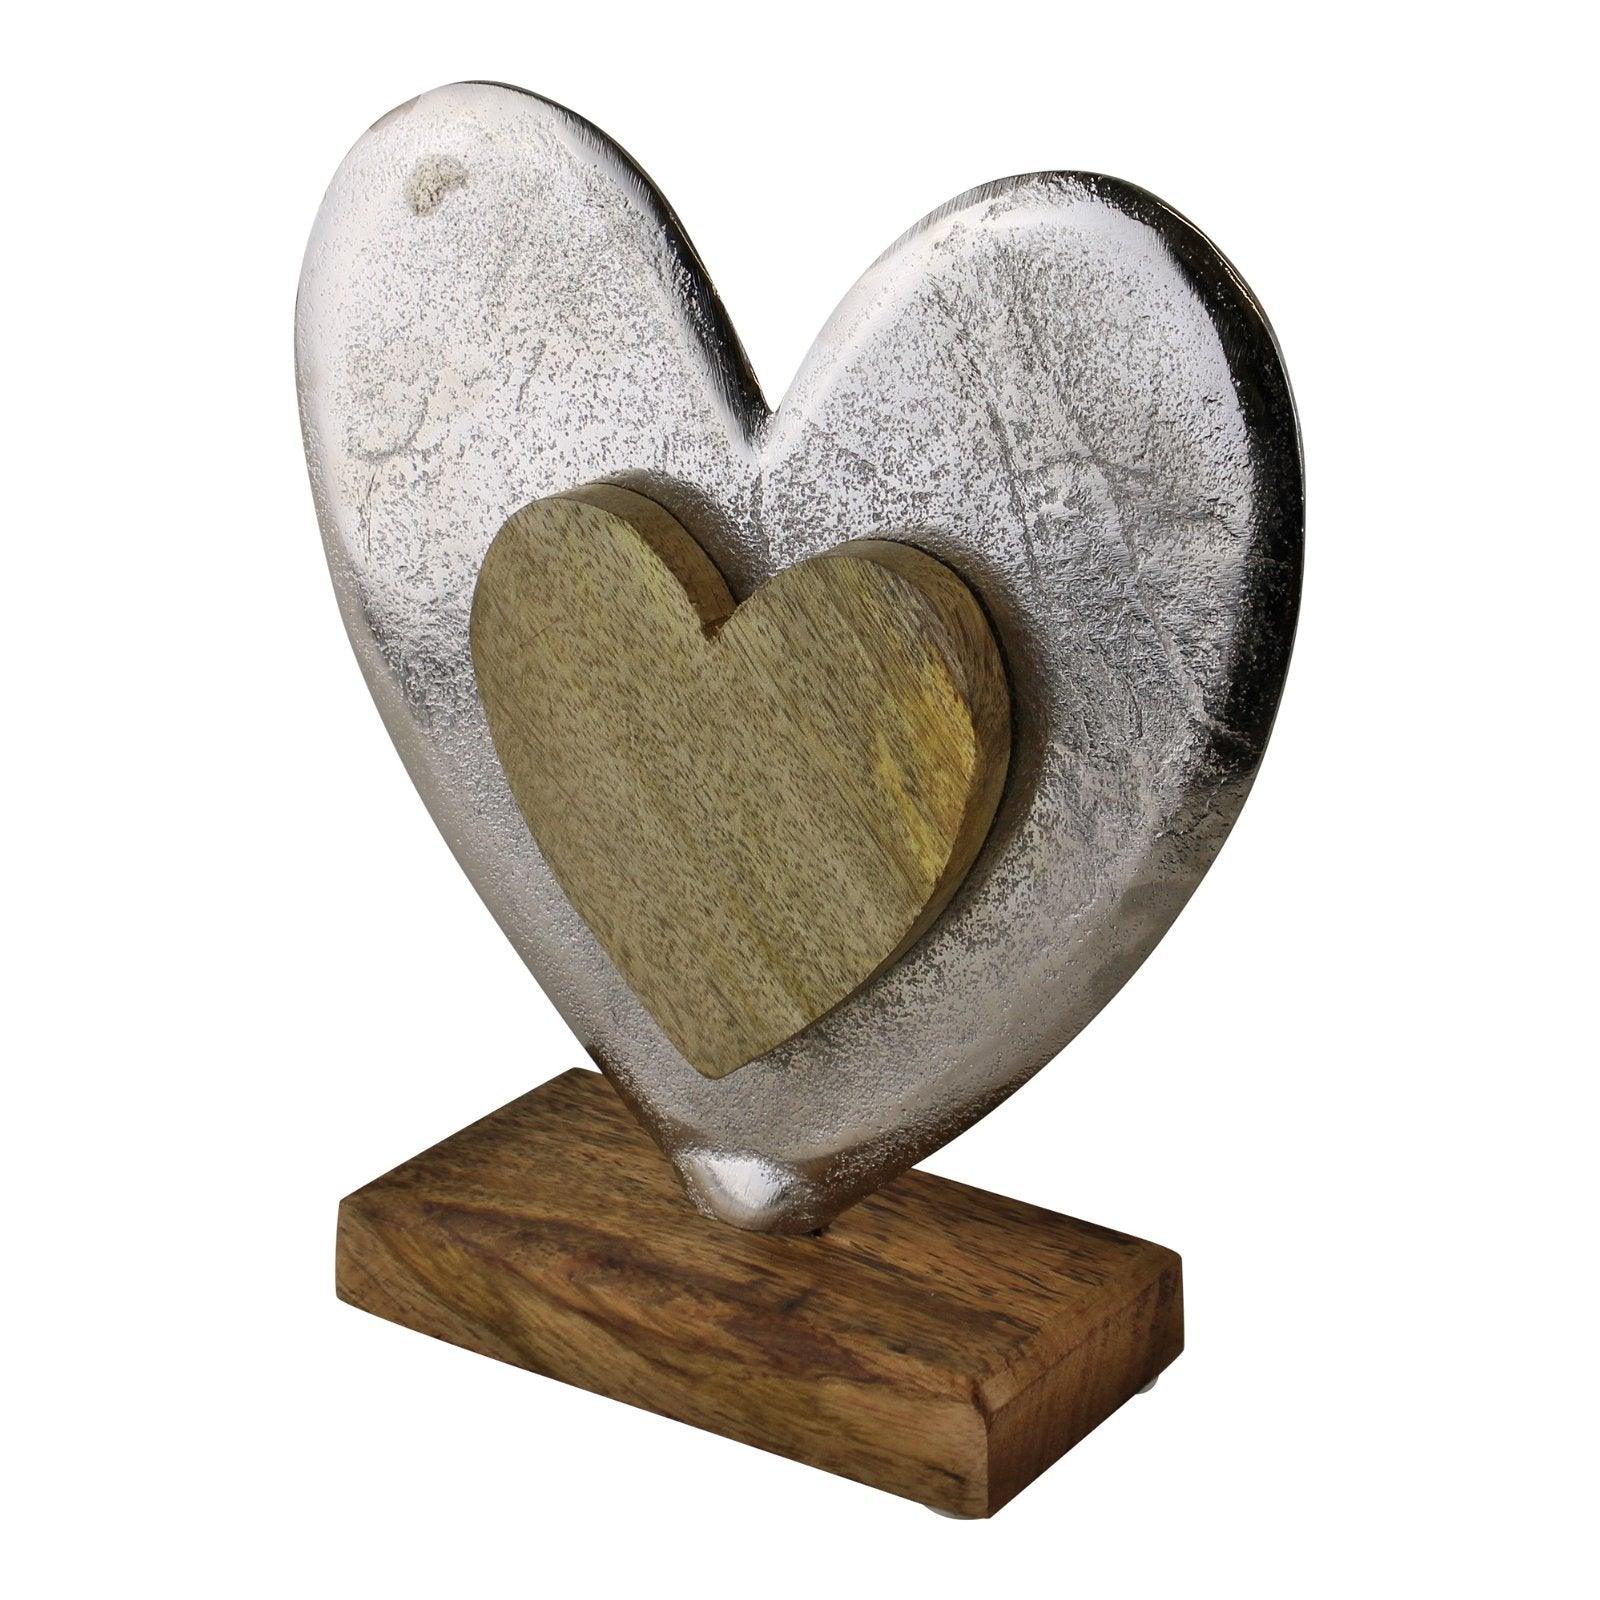 Large Metal and Wood Standing Heart Decoration - £22.99 - Ornaments 